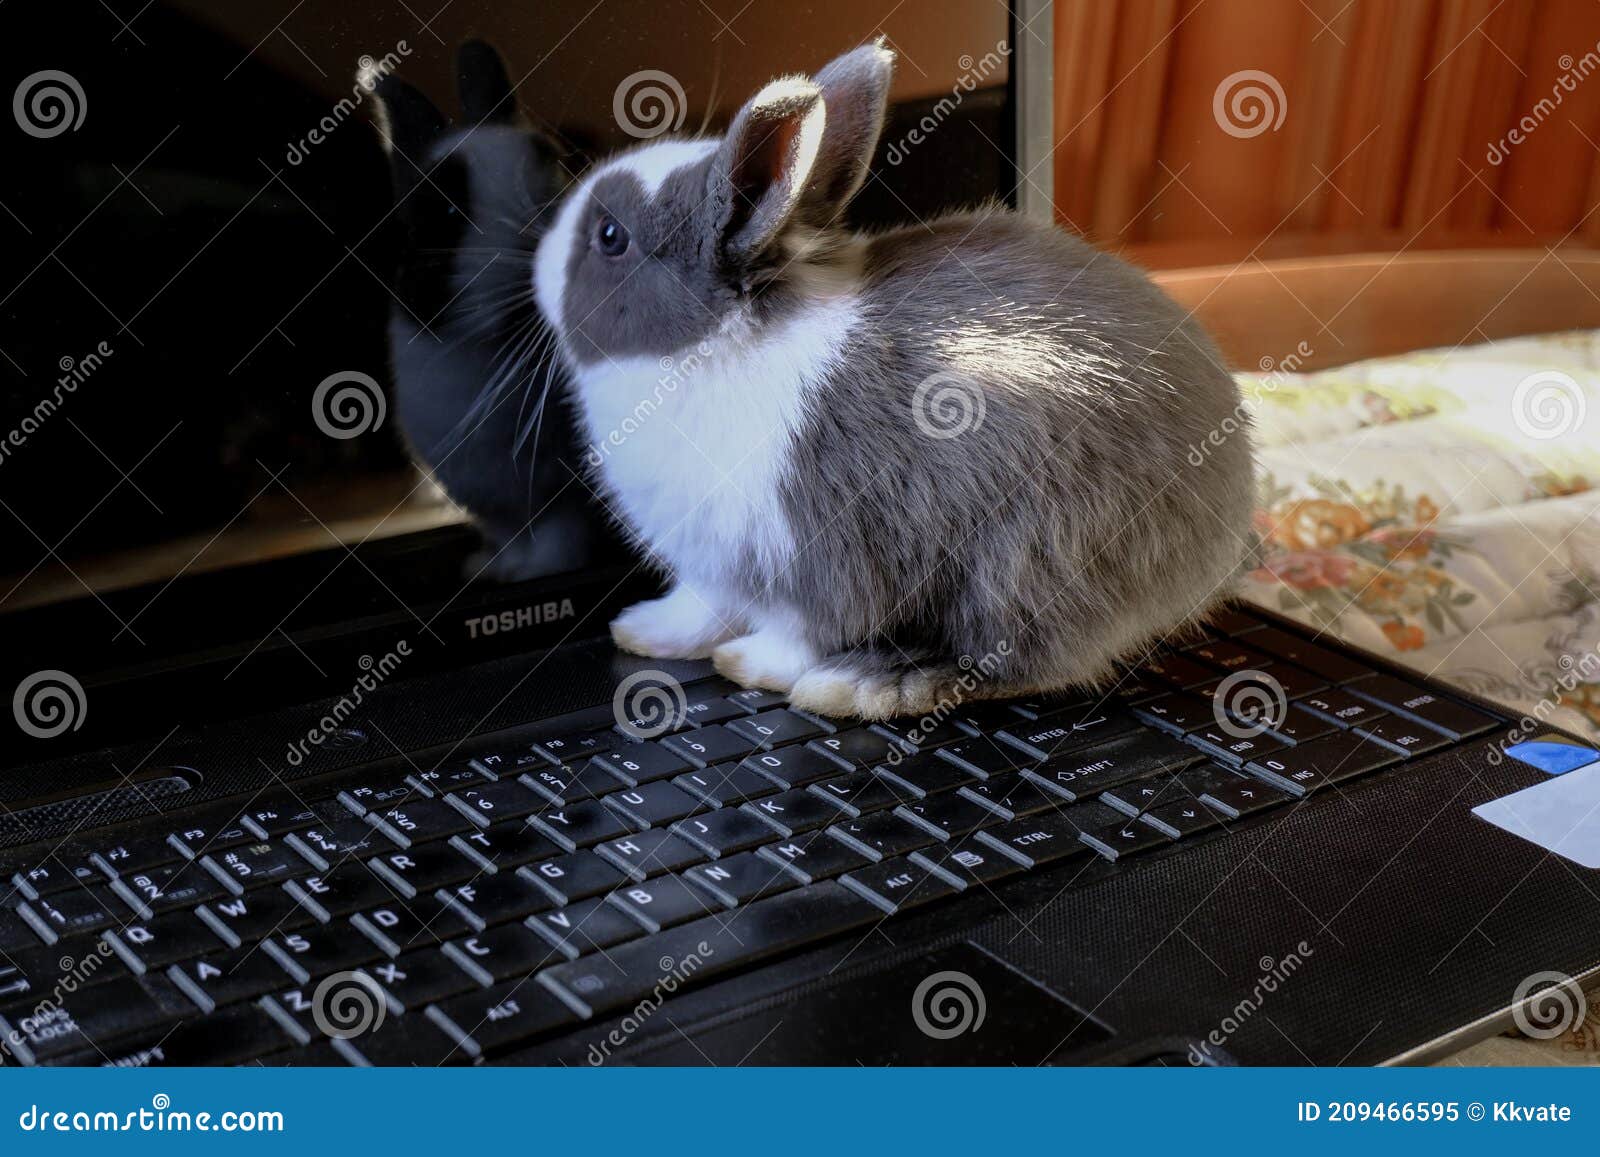 Adorable Fluffy White and Gray Baby Bunny Playing on Black Laptop Close-up.  Cute Domestic Animal. Animals and Technology Stock Image - Image of furry,  adorable: 209466595